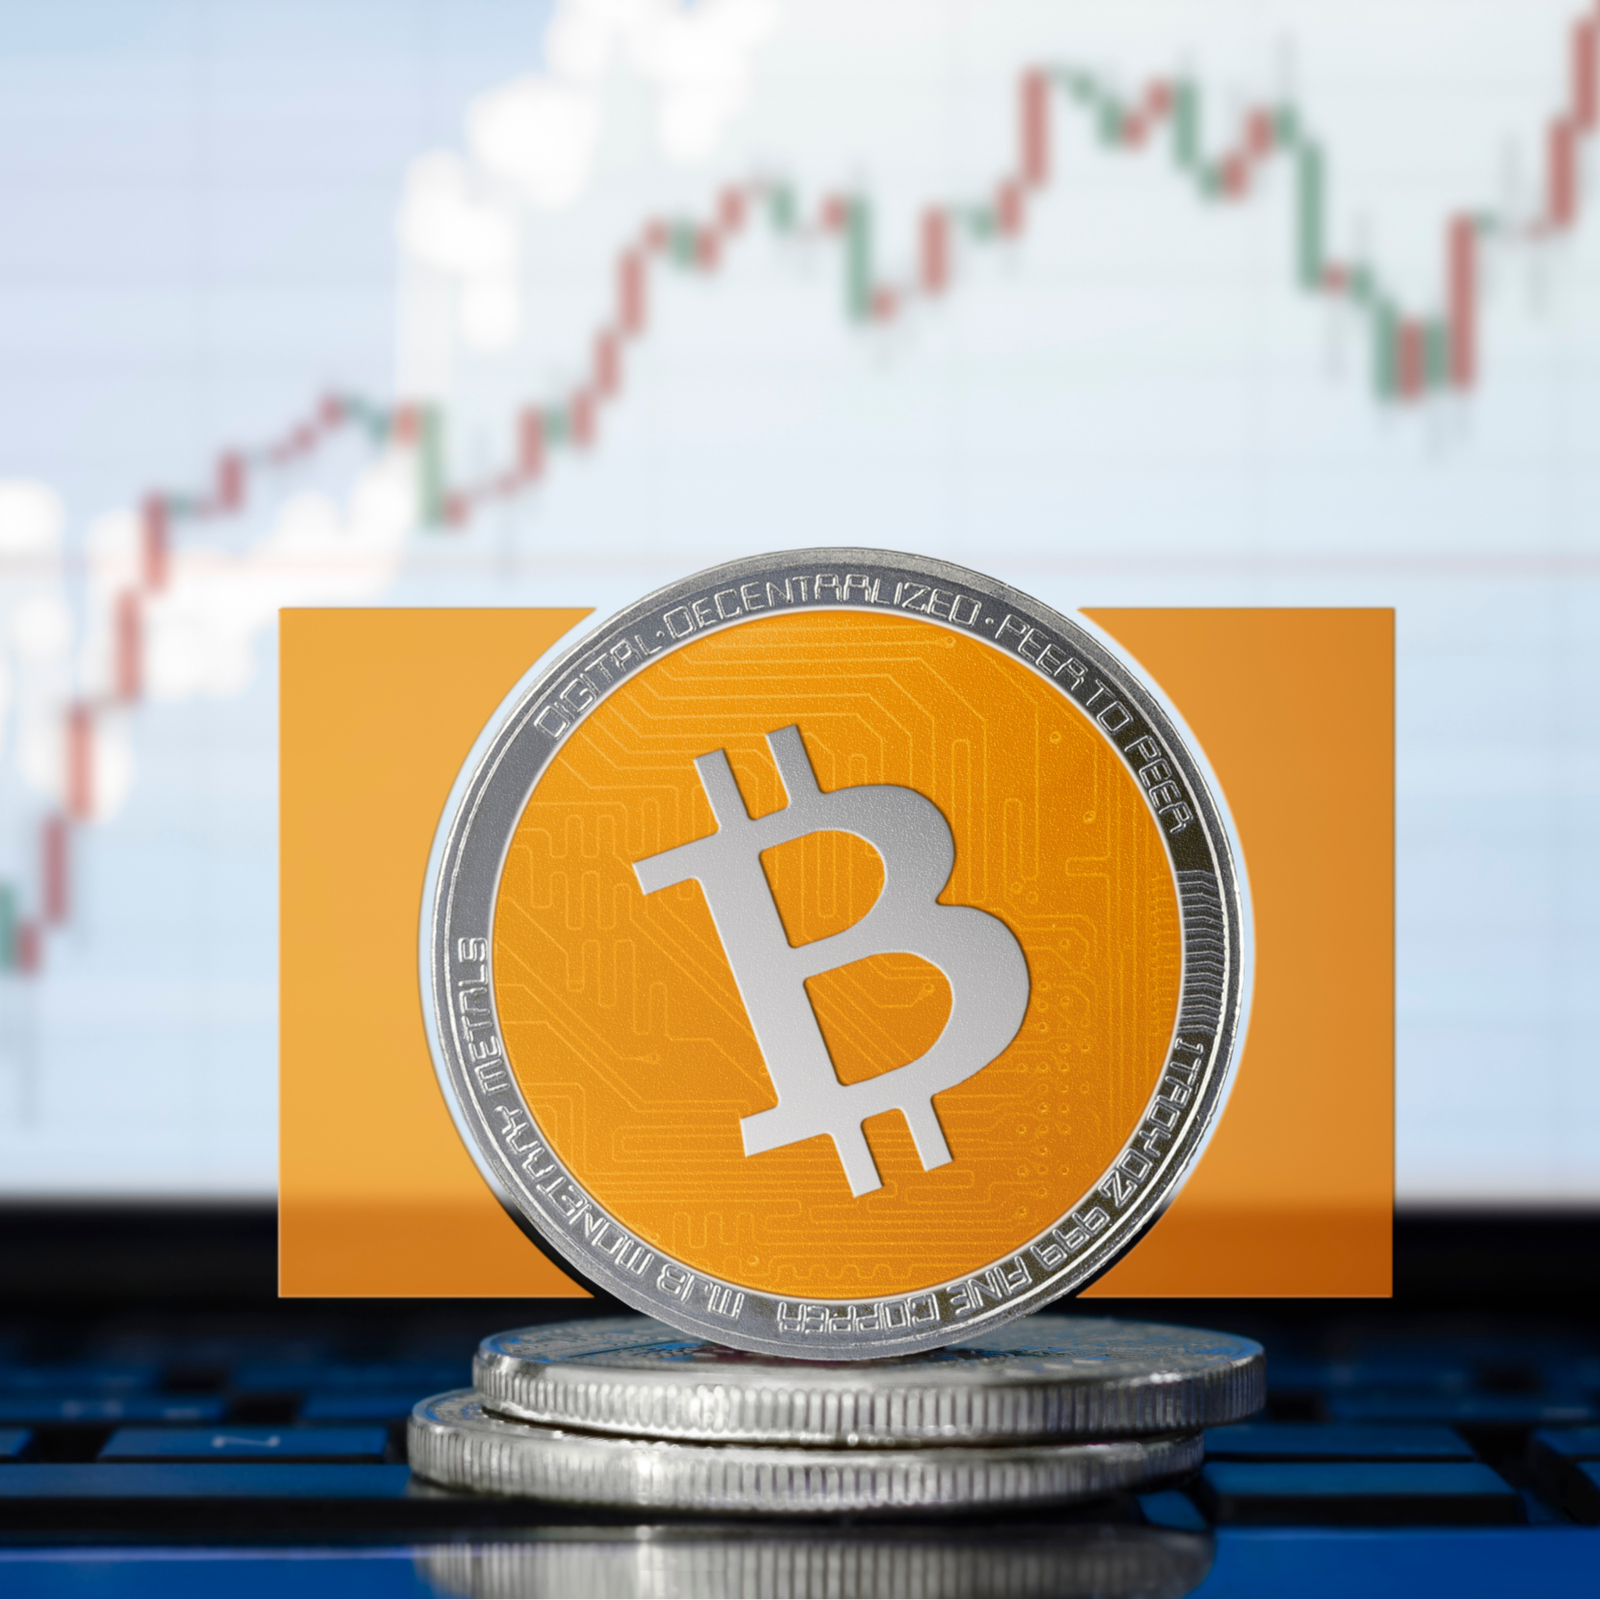 Markets Update: Bitcoin Cash Prices Jump More Than 140% This Week